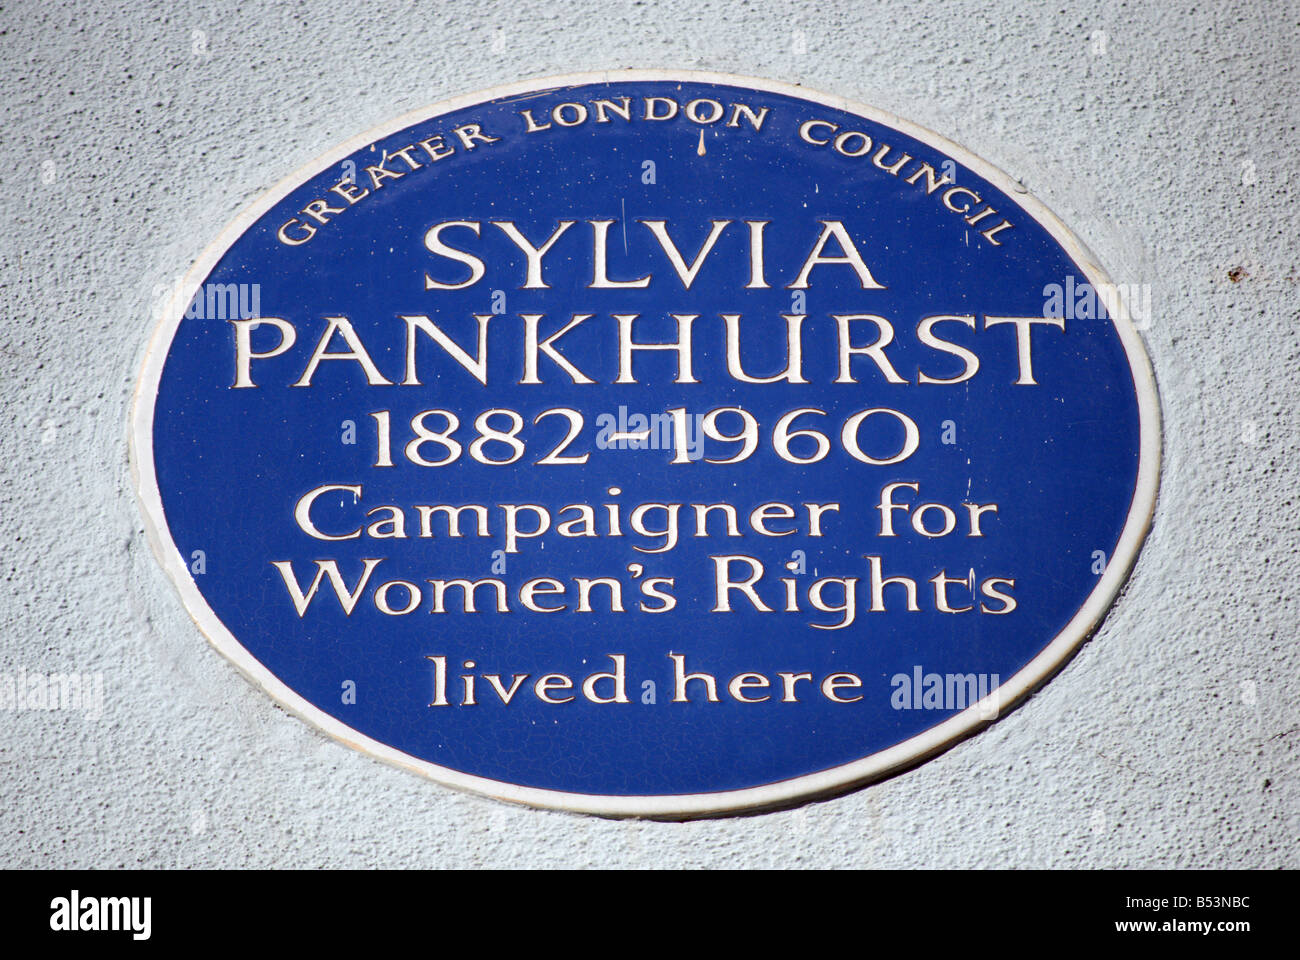 Sylvia Pankhurst Blue Plaque High Resolution Stock Photography and ...